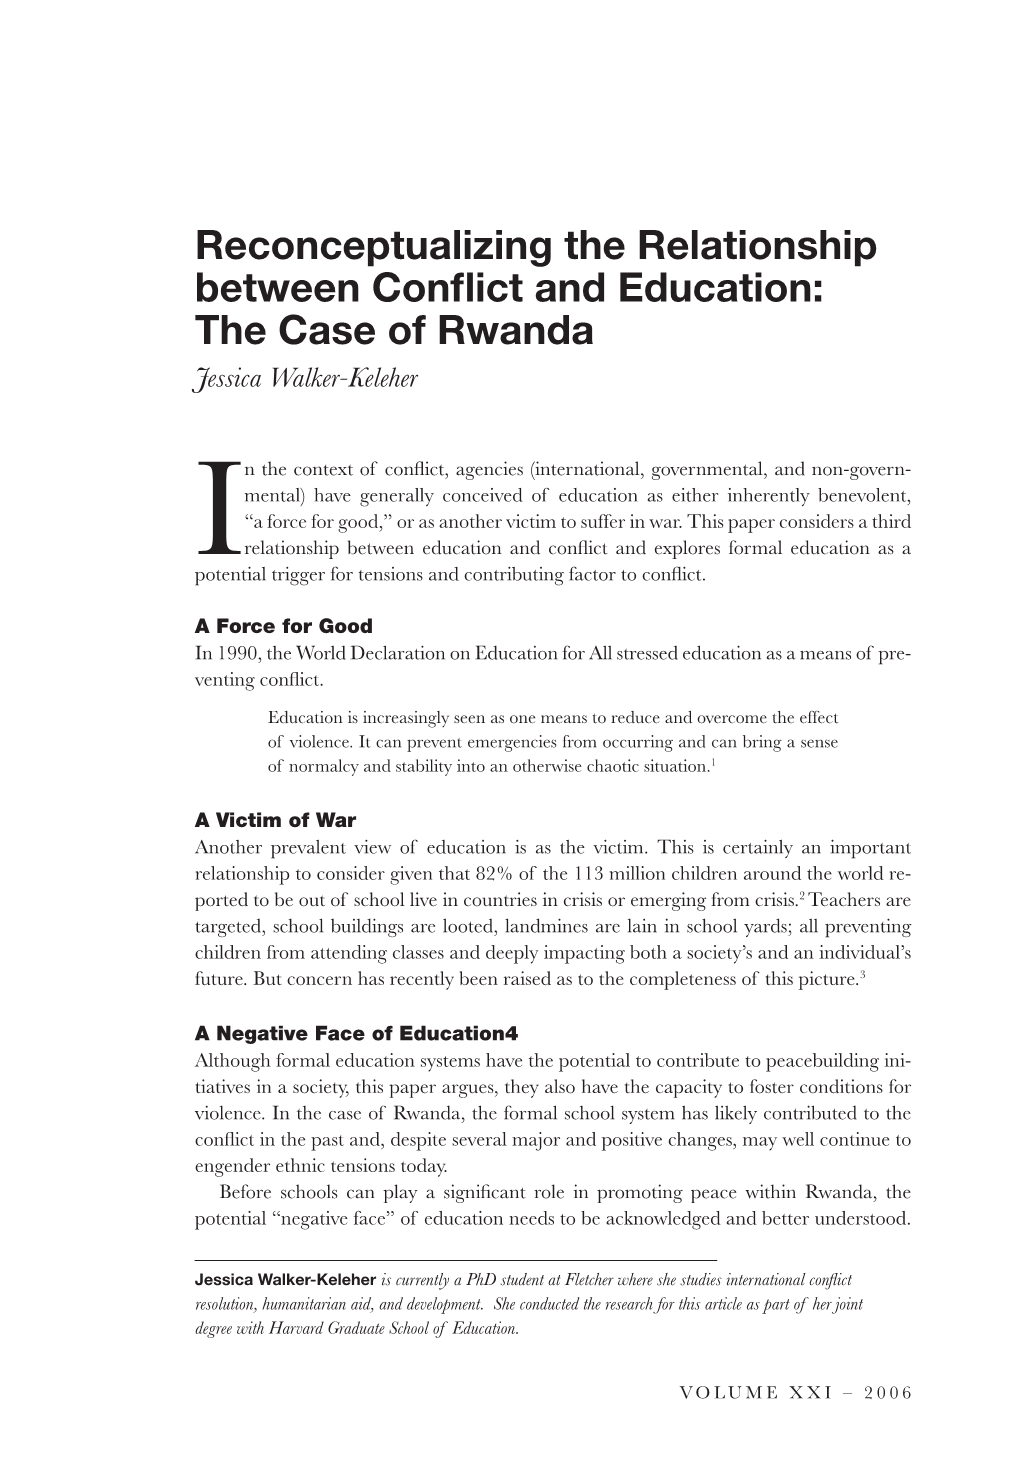 Reconceptualizing the Relationship Between Conflict and Education: the Case of Rwanda Jessica Walker-Keleher